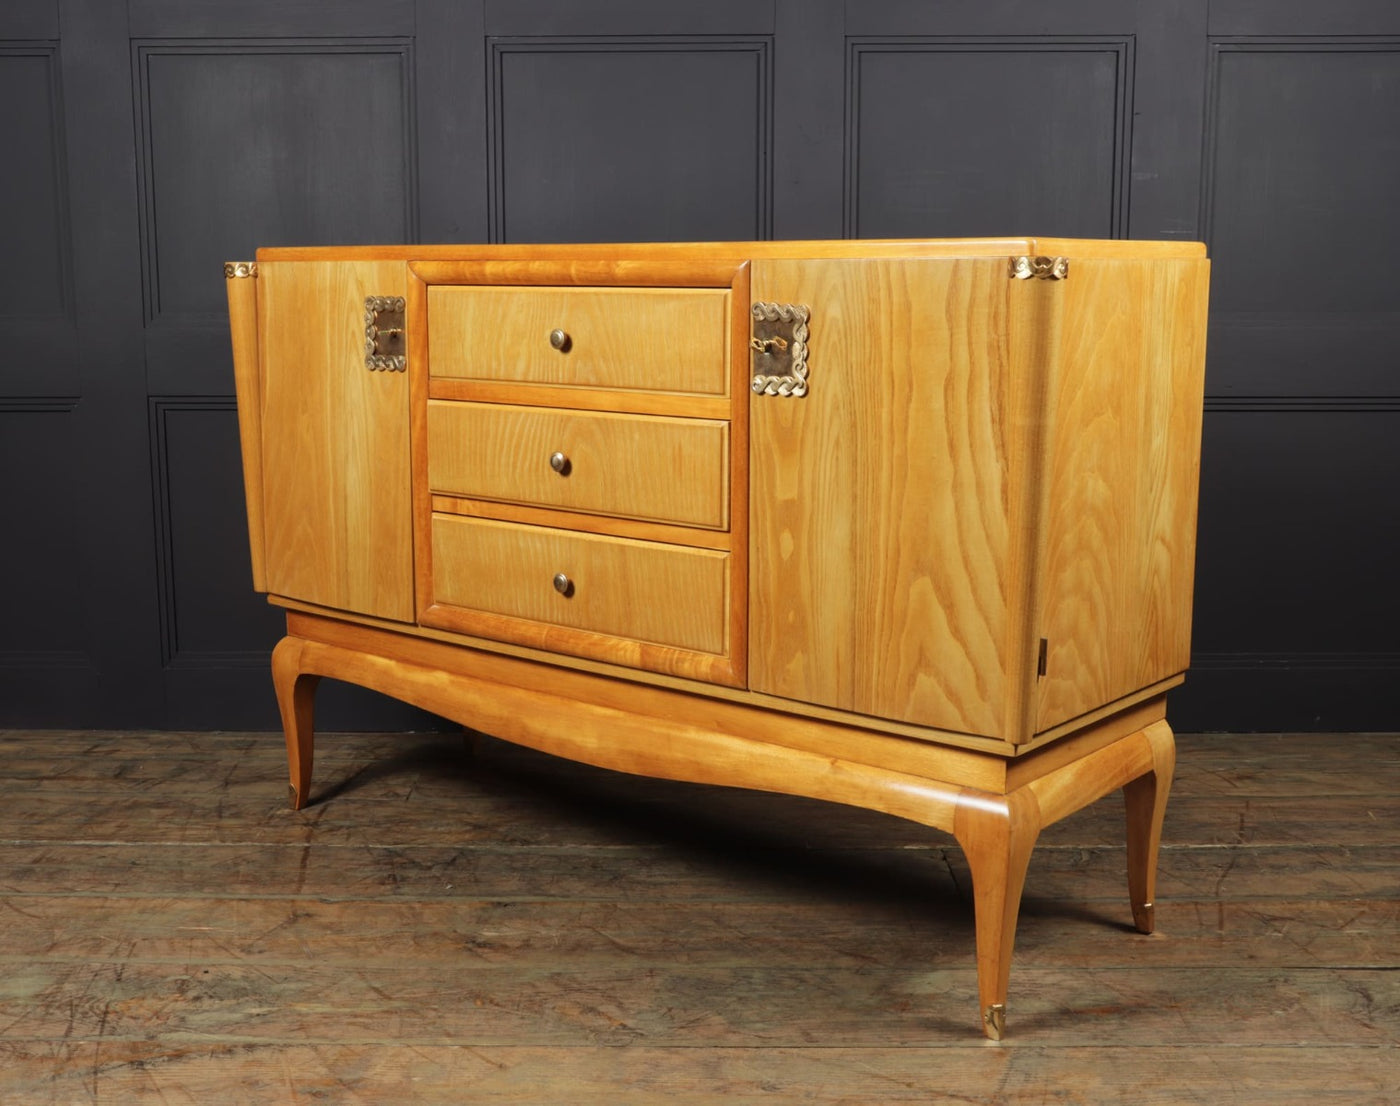 French Art Deco Sideboard in Cherry